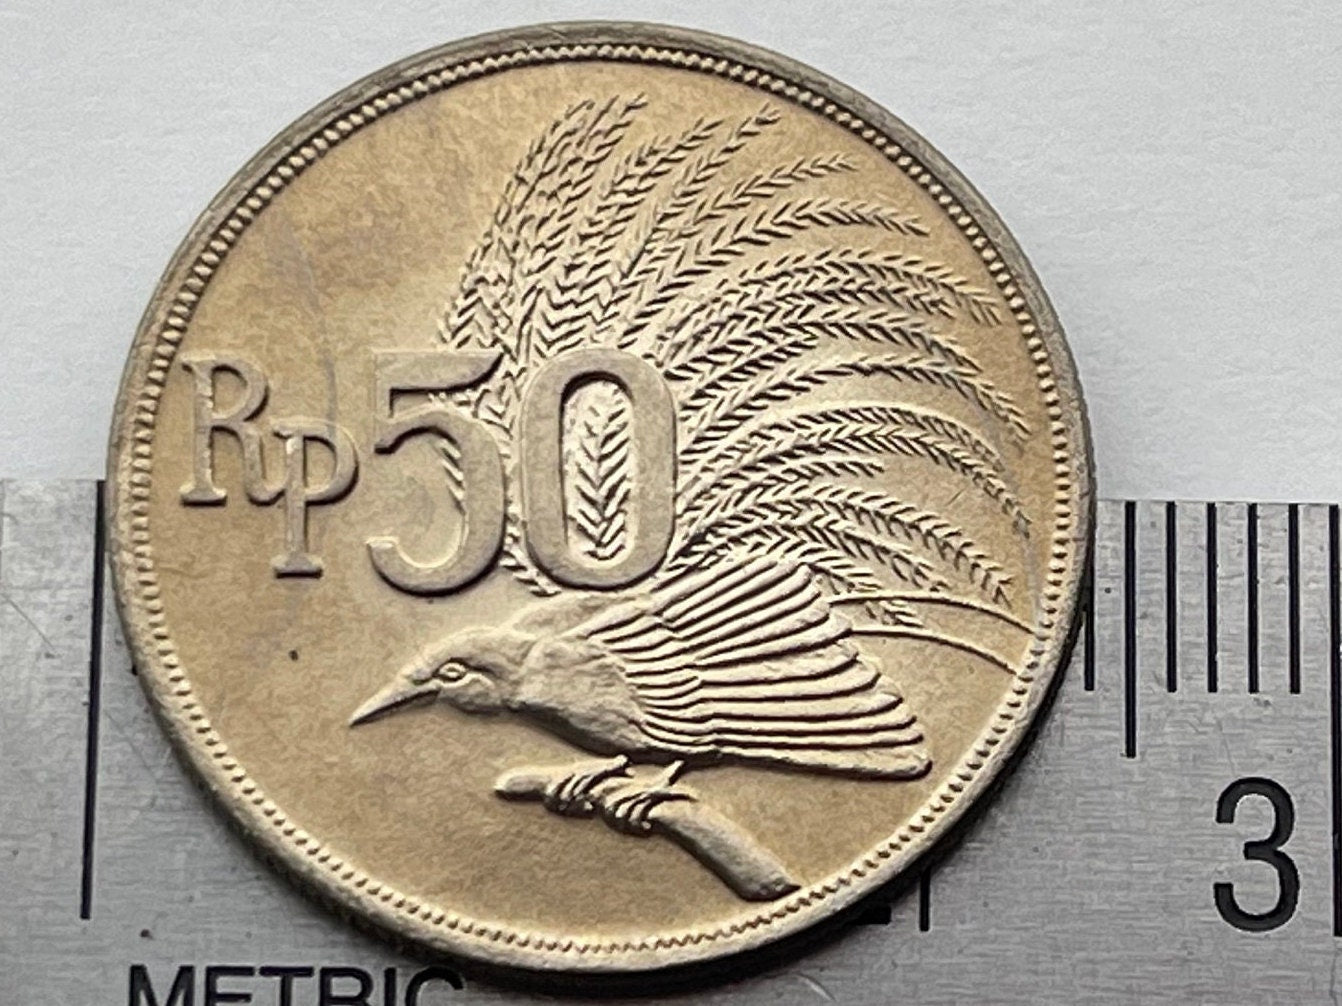 Greater Bird of Paradise 50 Rupiah Indonesia Authentic Coin Money for Jewelry and Craft Making (1971)